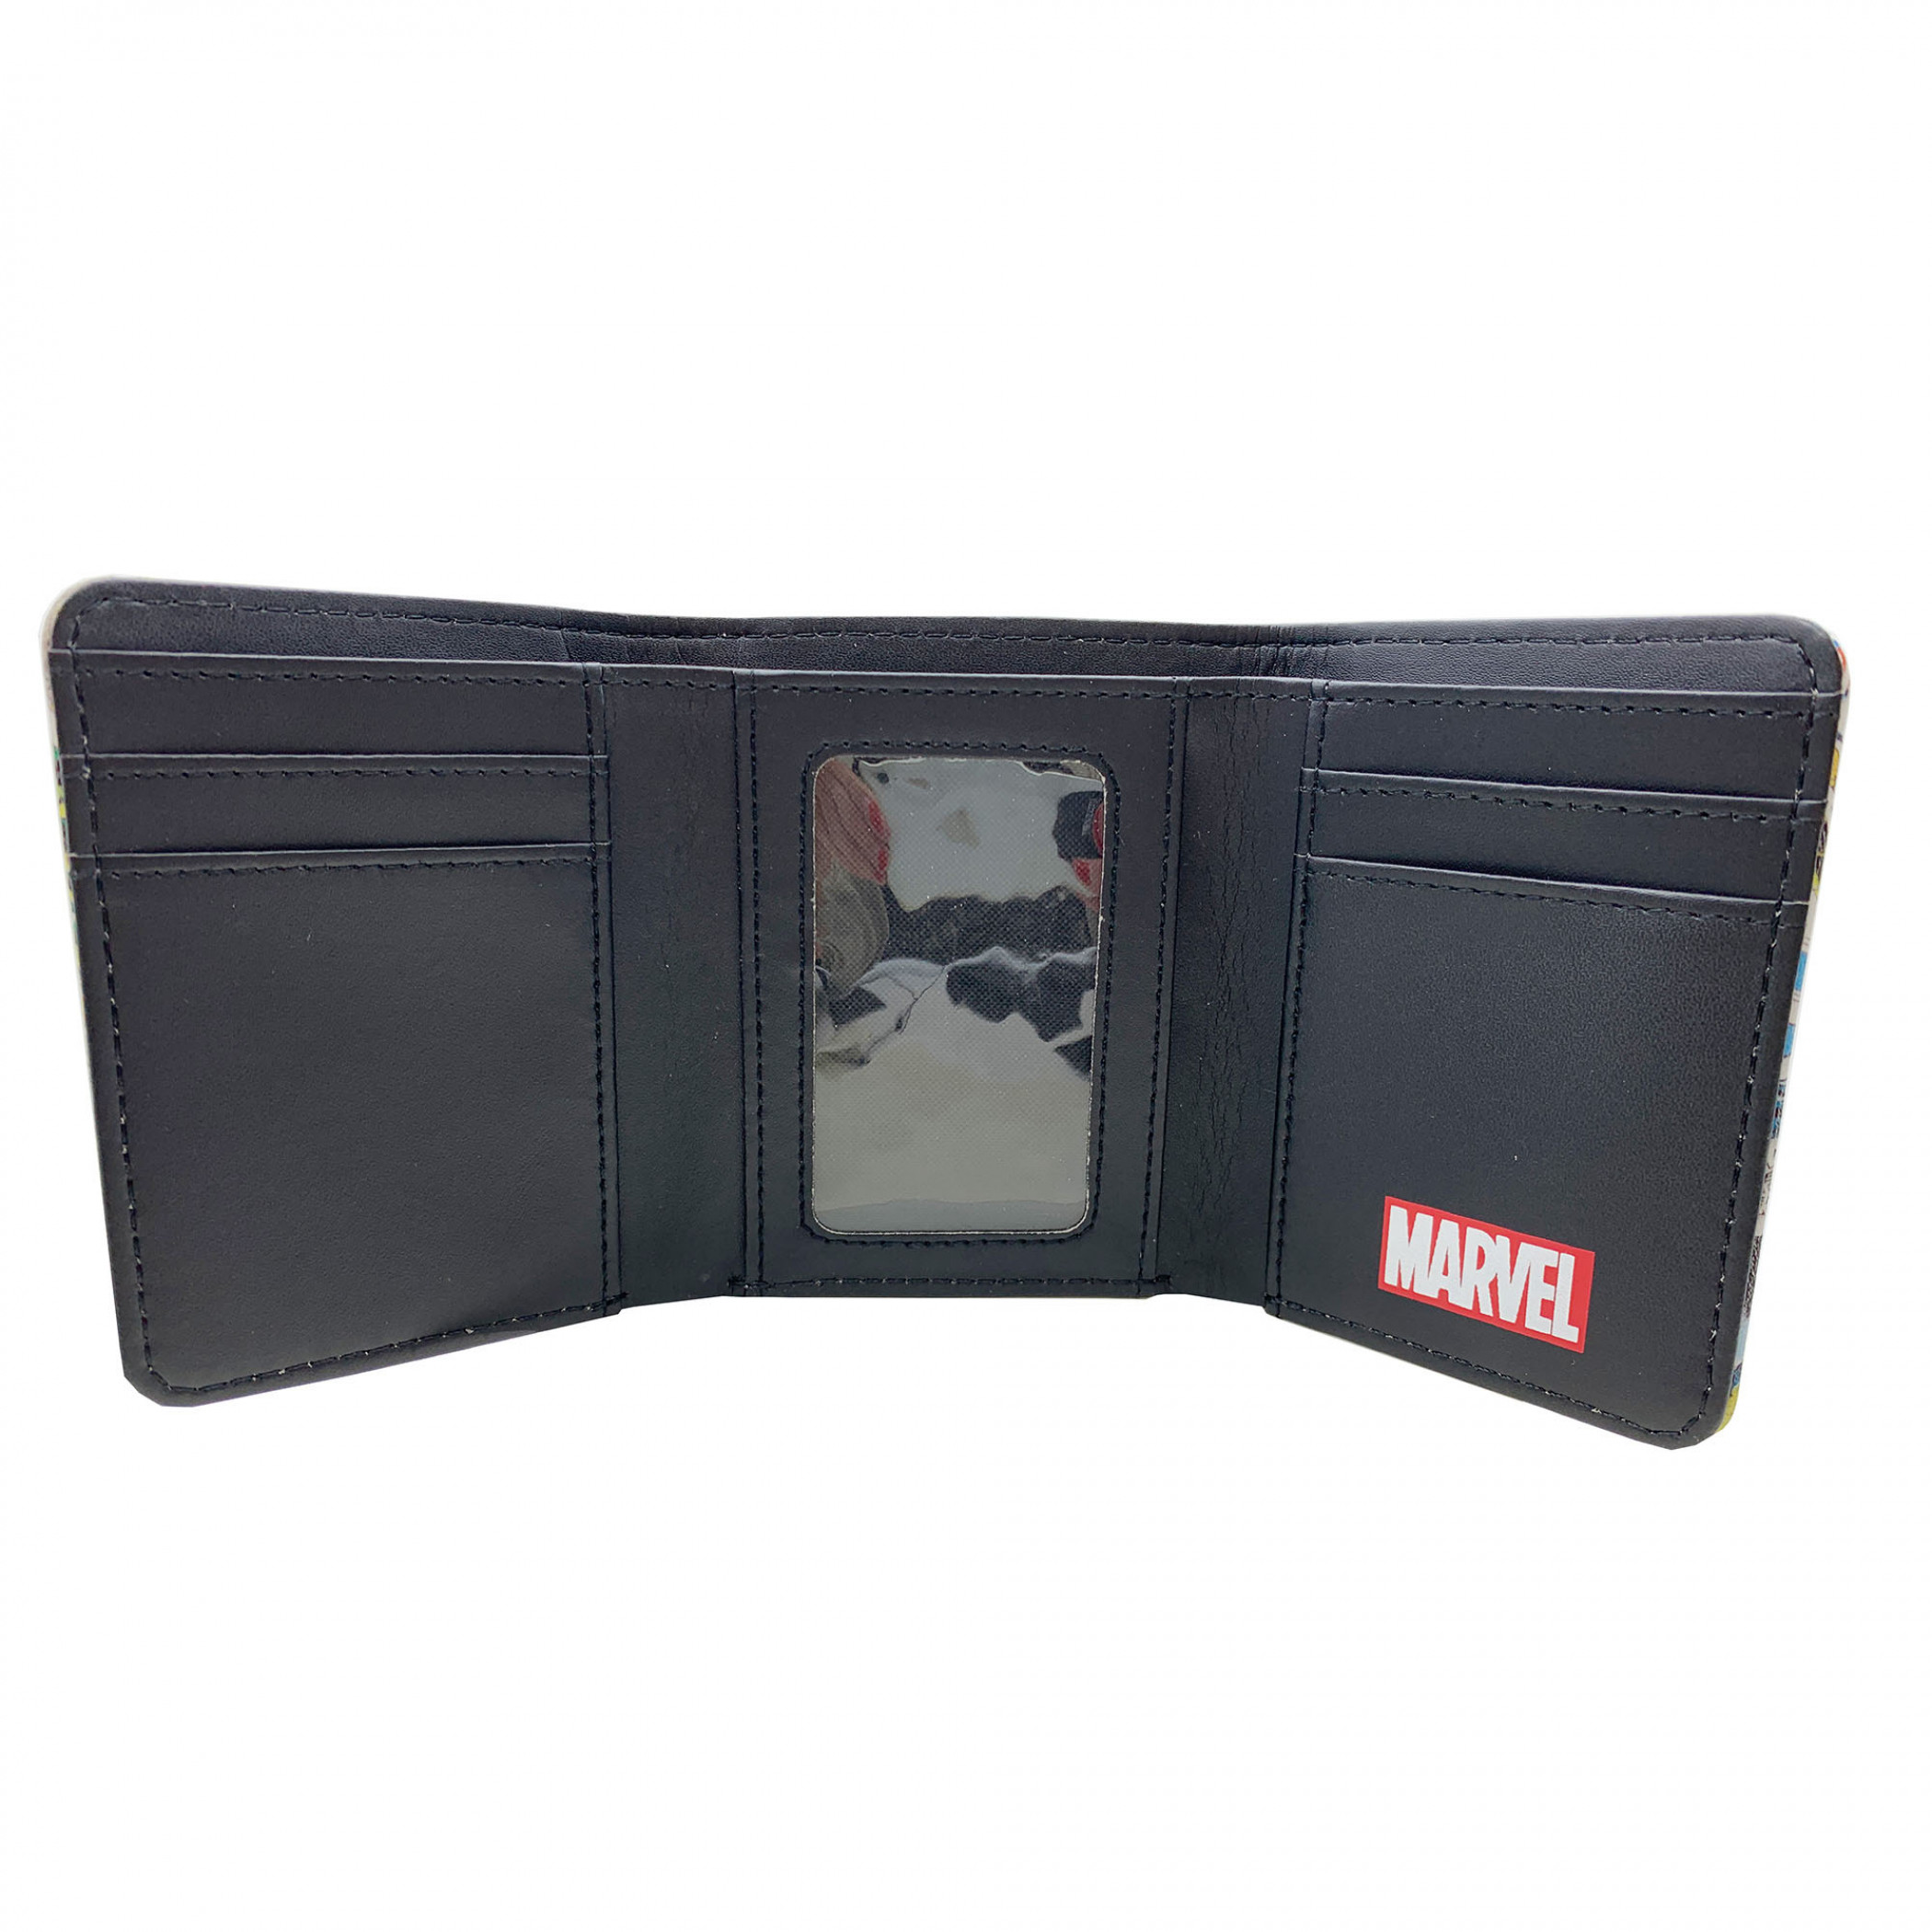 Captain America Comic Strips Trifold Wallet